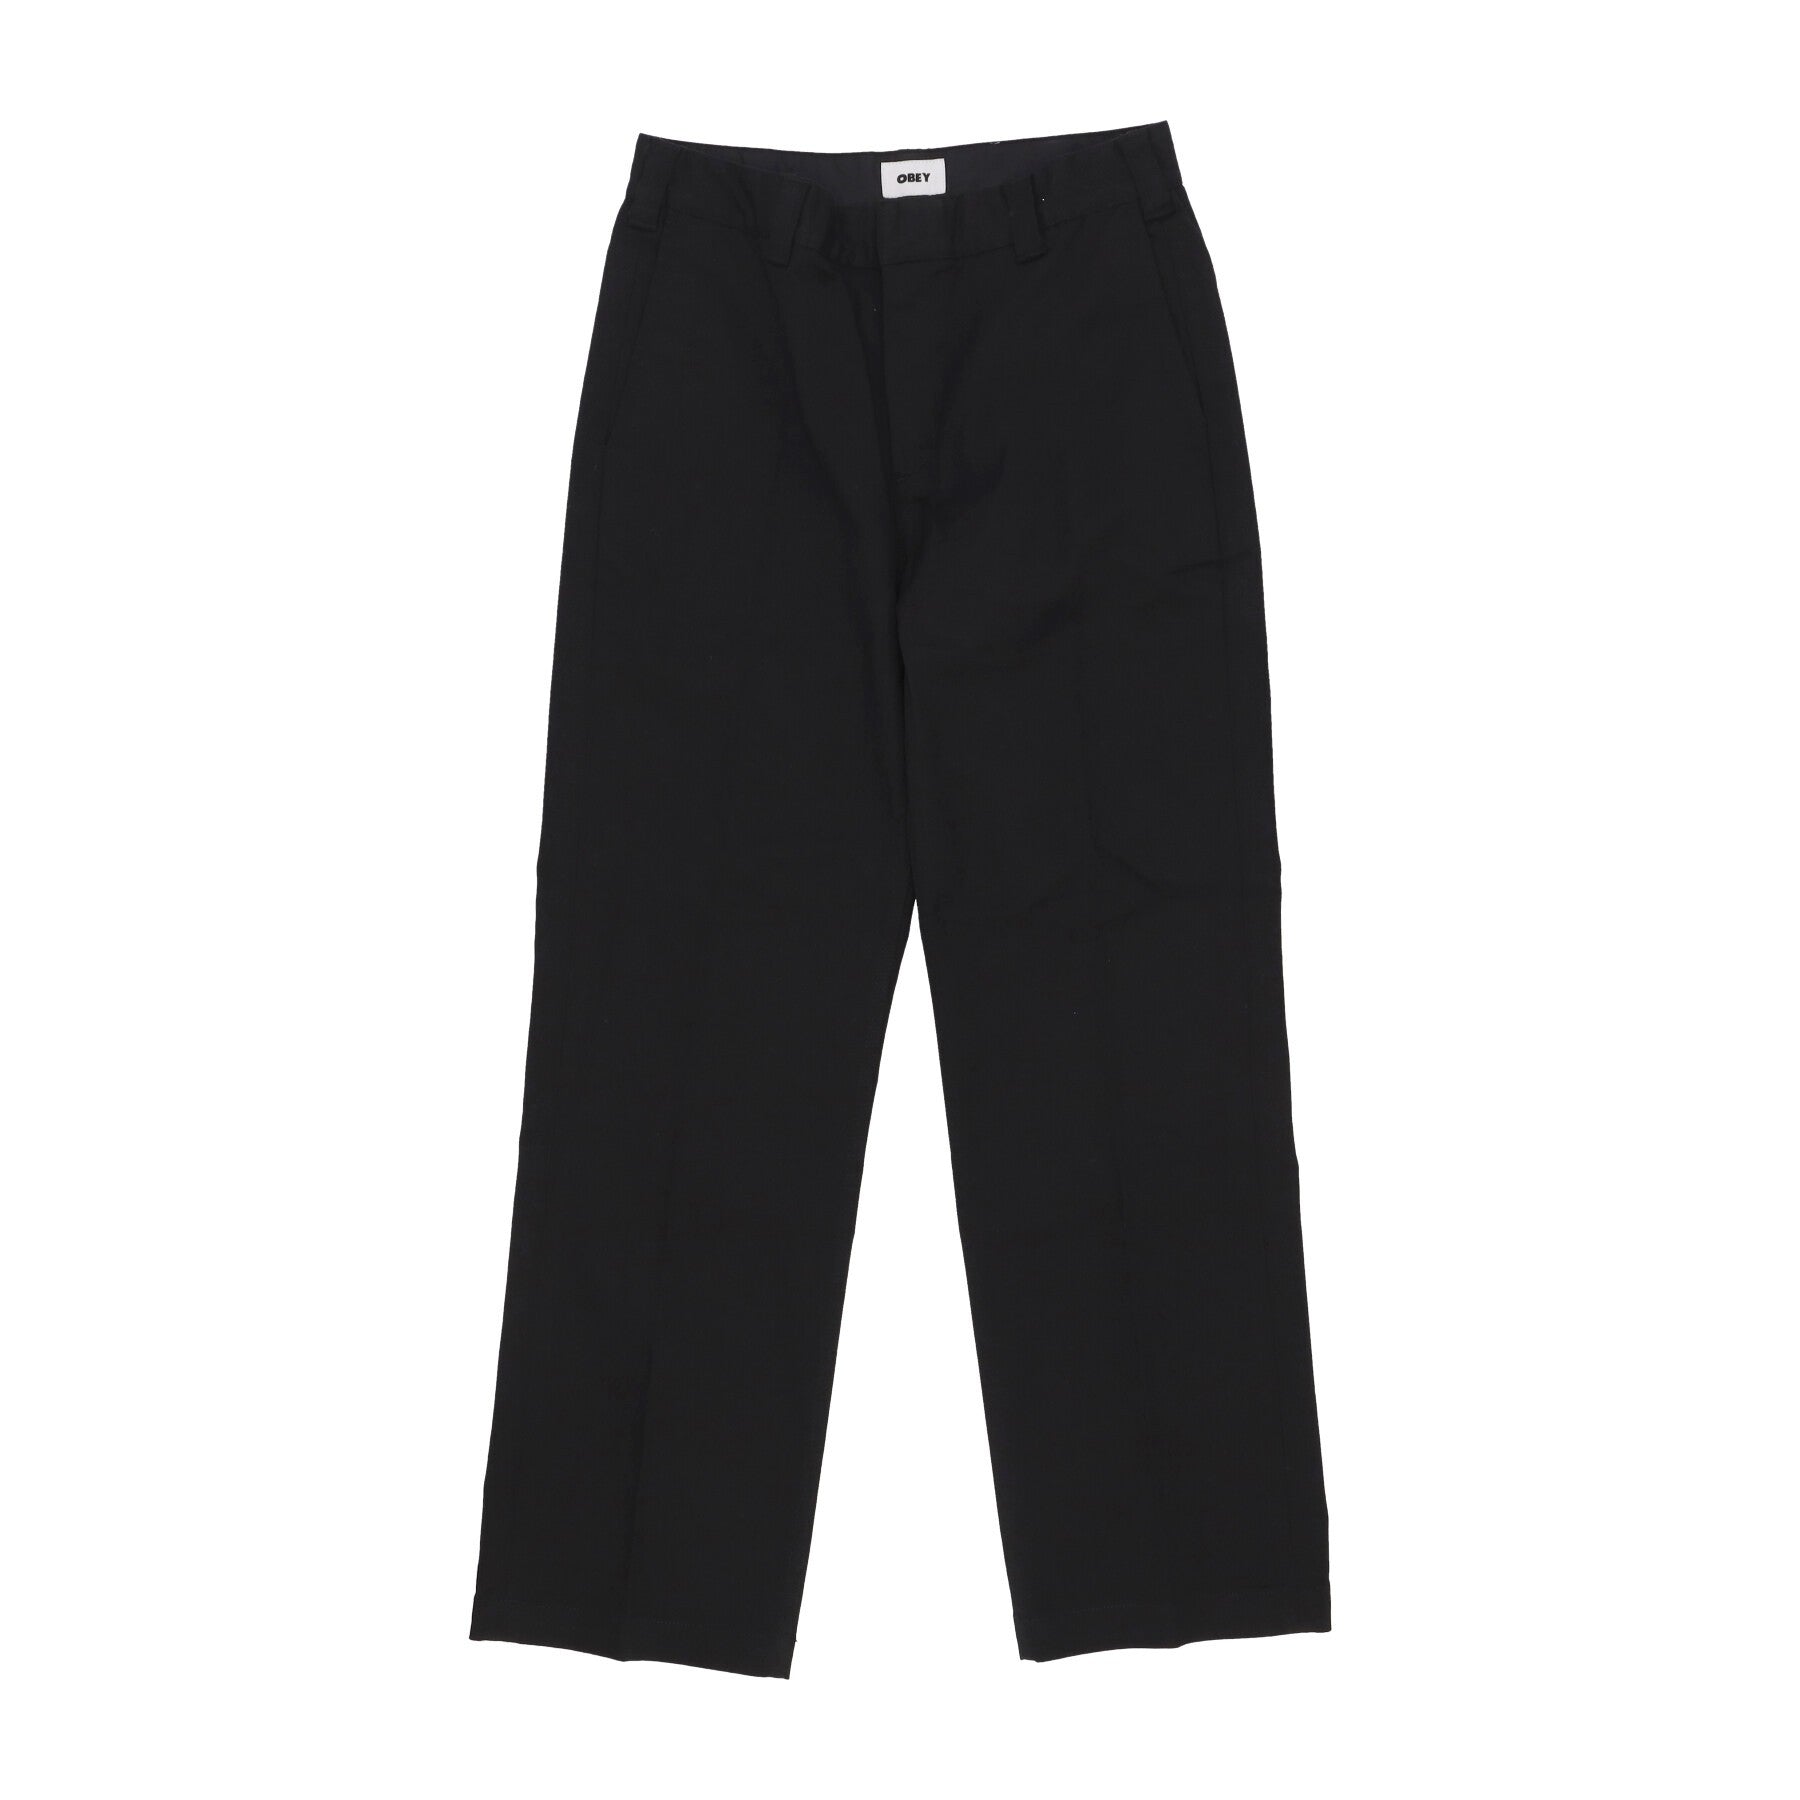 Obey, Pantalone Lungo Donna Daily Pant, Black